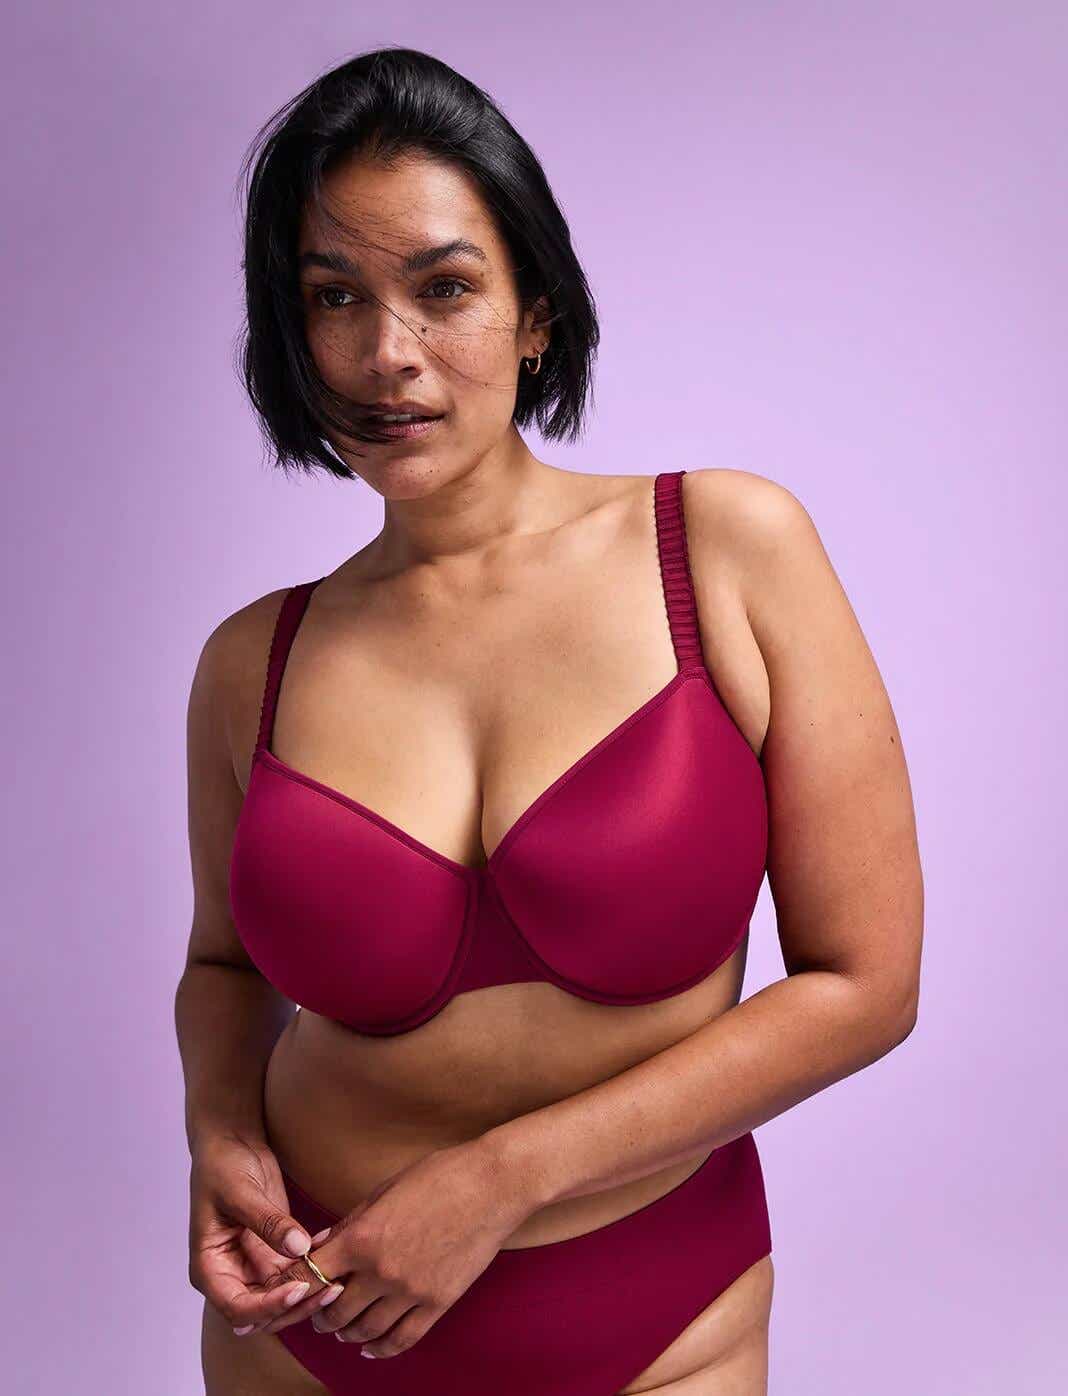 angelina vargas recommends big breasts on tumblr pic